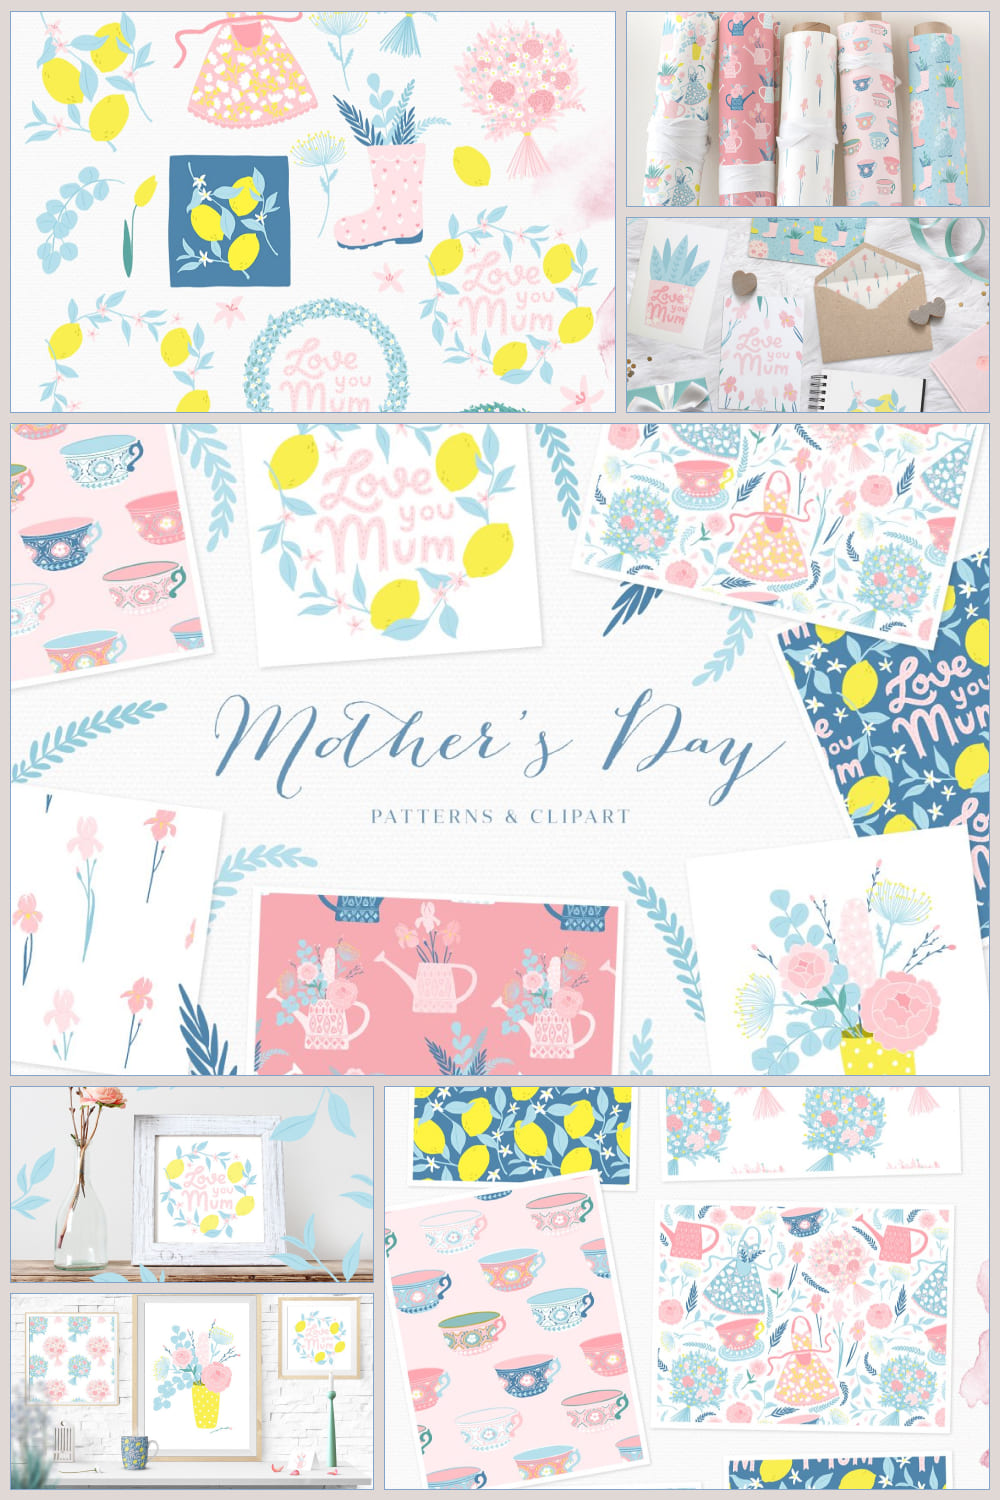 Cute spring patterns with Motrher's day quotes.